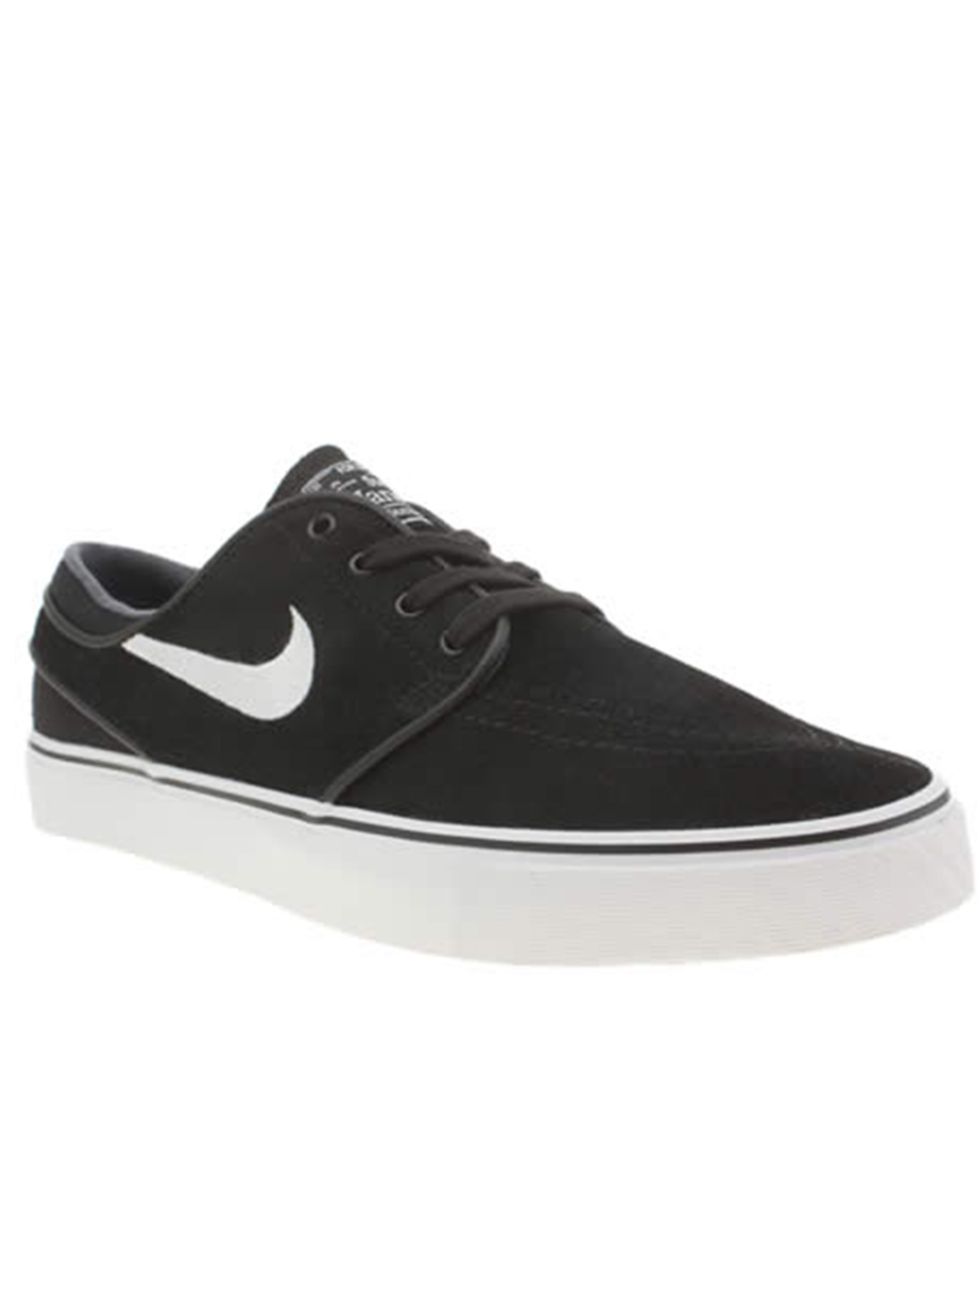 <p>Sneakers, £60, Nike at <a href="http://www.schuh.co.uk/womens/nike-sb-zoom-stefan-janoski-black-and-white-trainers/1960007250/" target="_blank">Schuh</a></p>